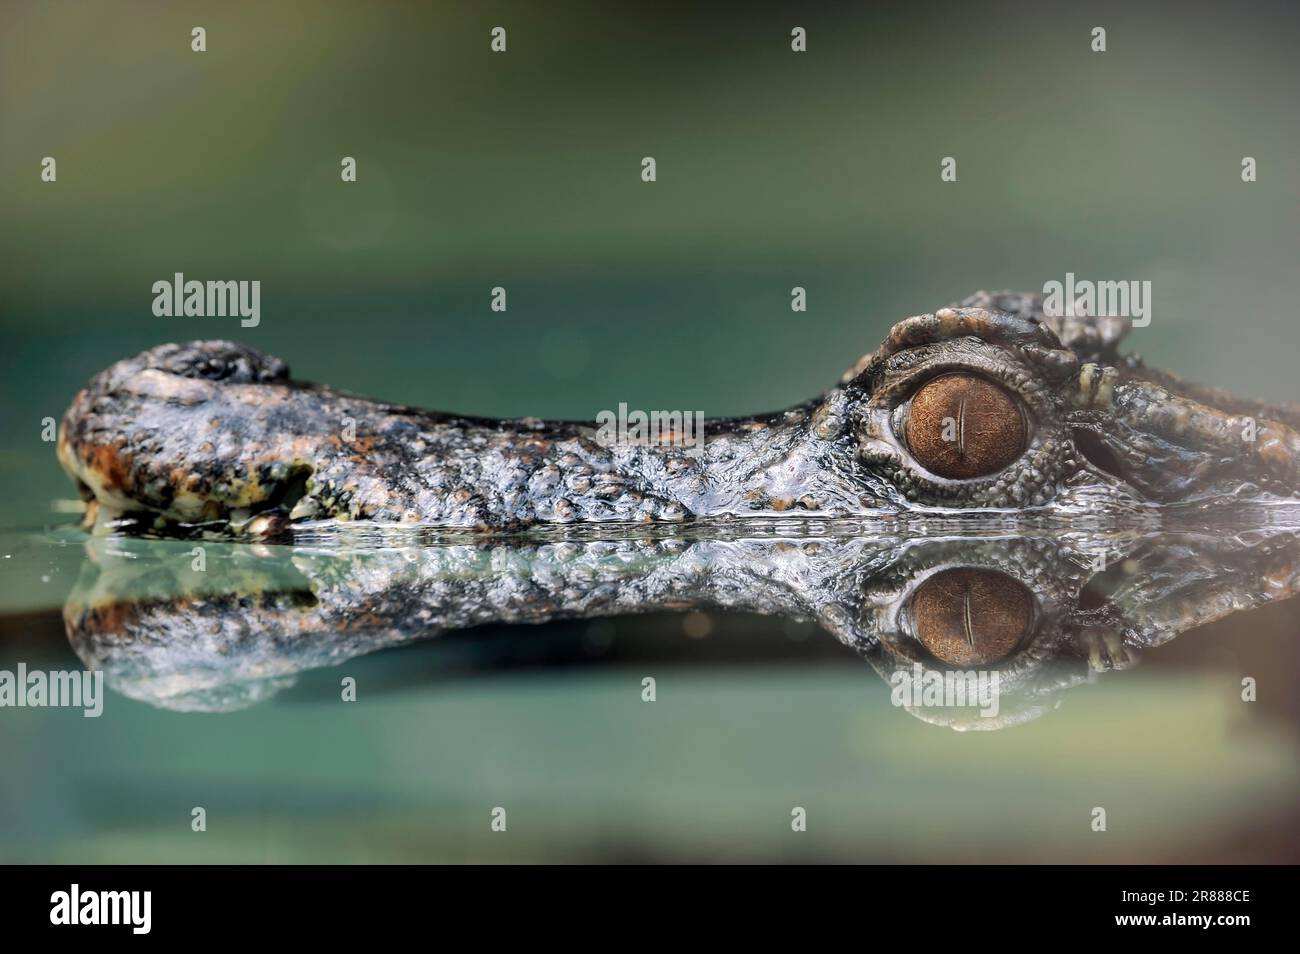 Wedge-headed smooth-fronted caiman (Paleosuchus trigonatus), smooth-fronted caiman, lateral view Stock Photo